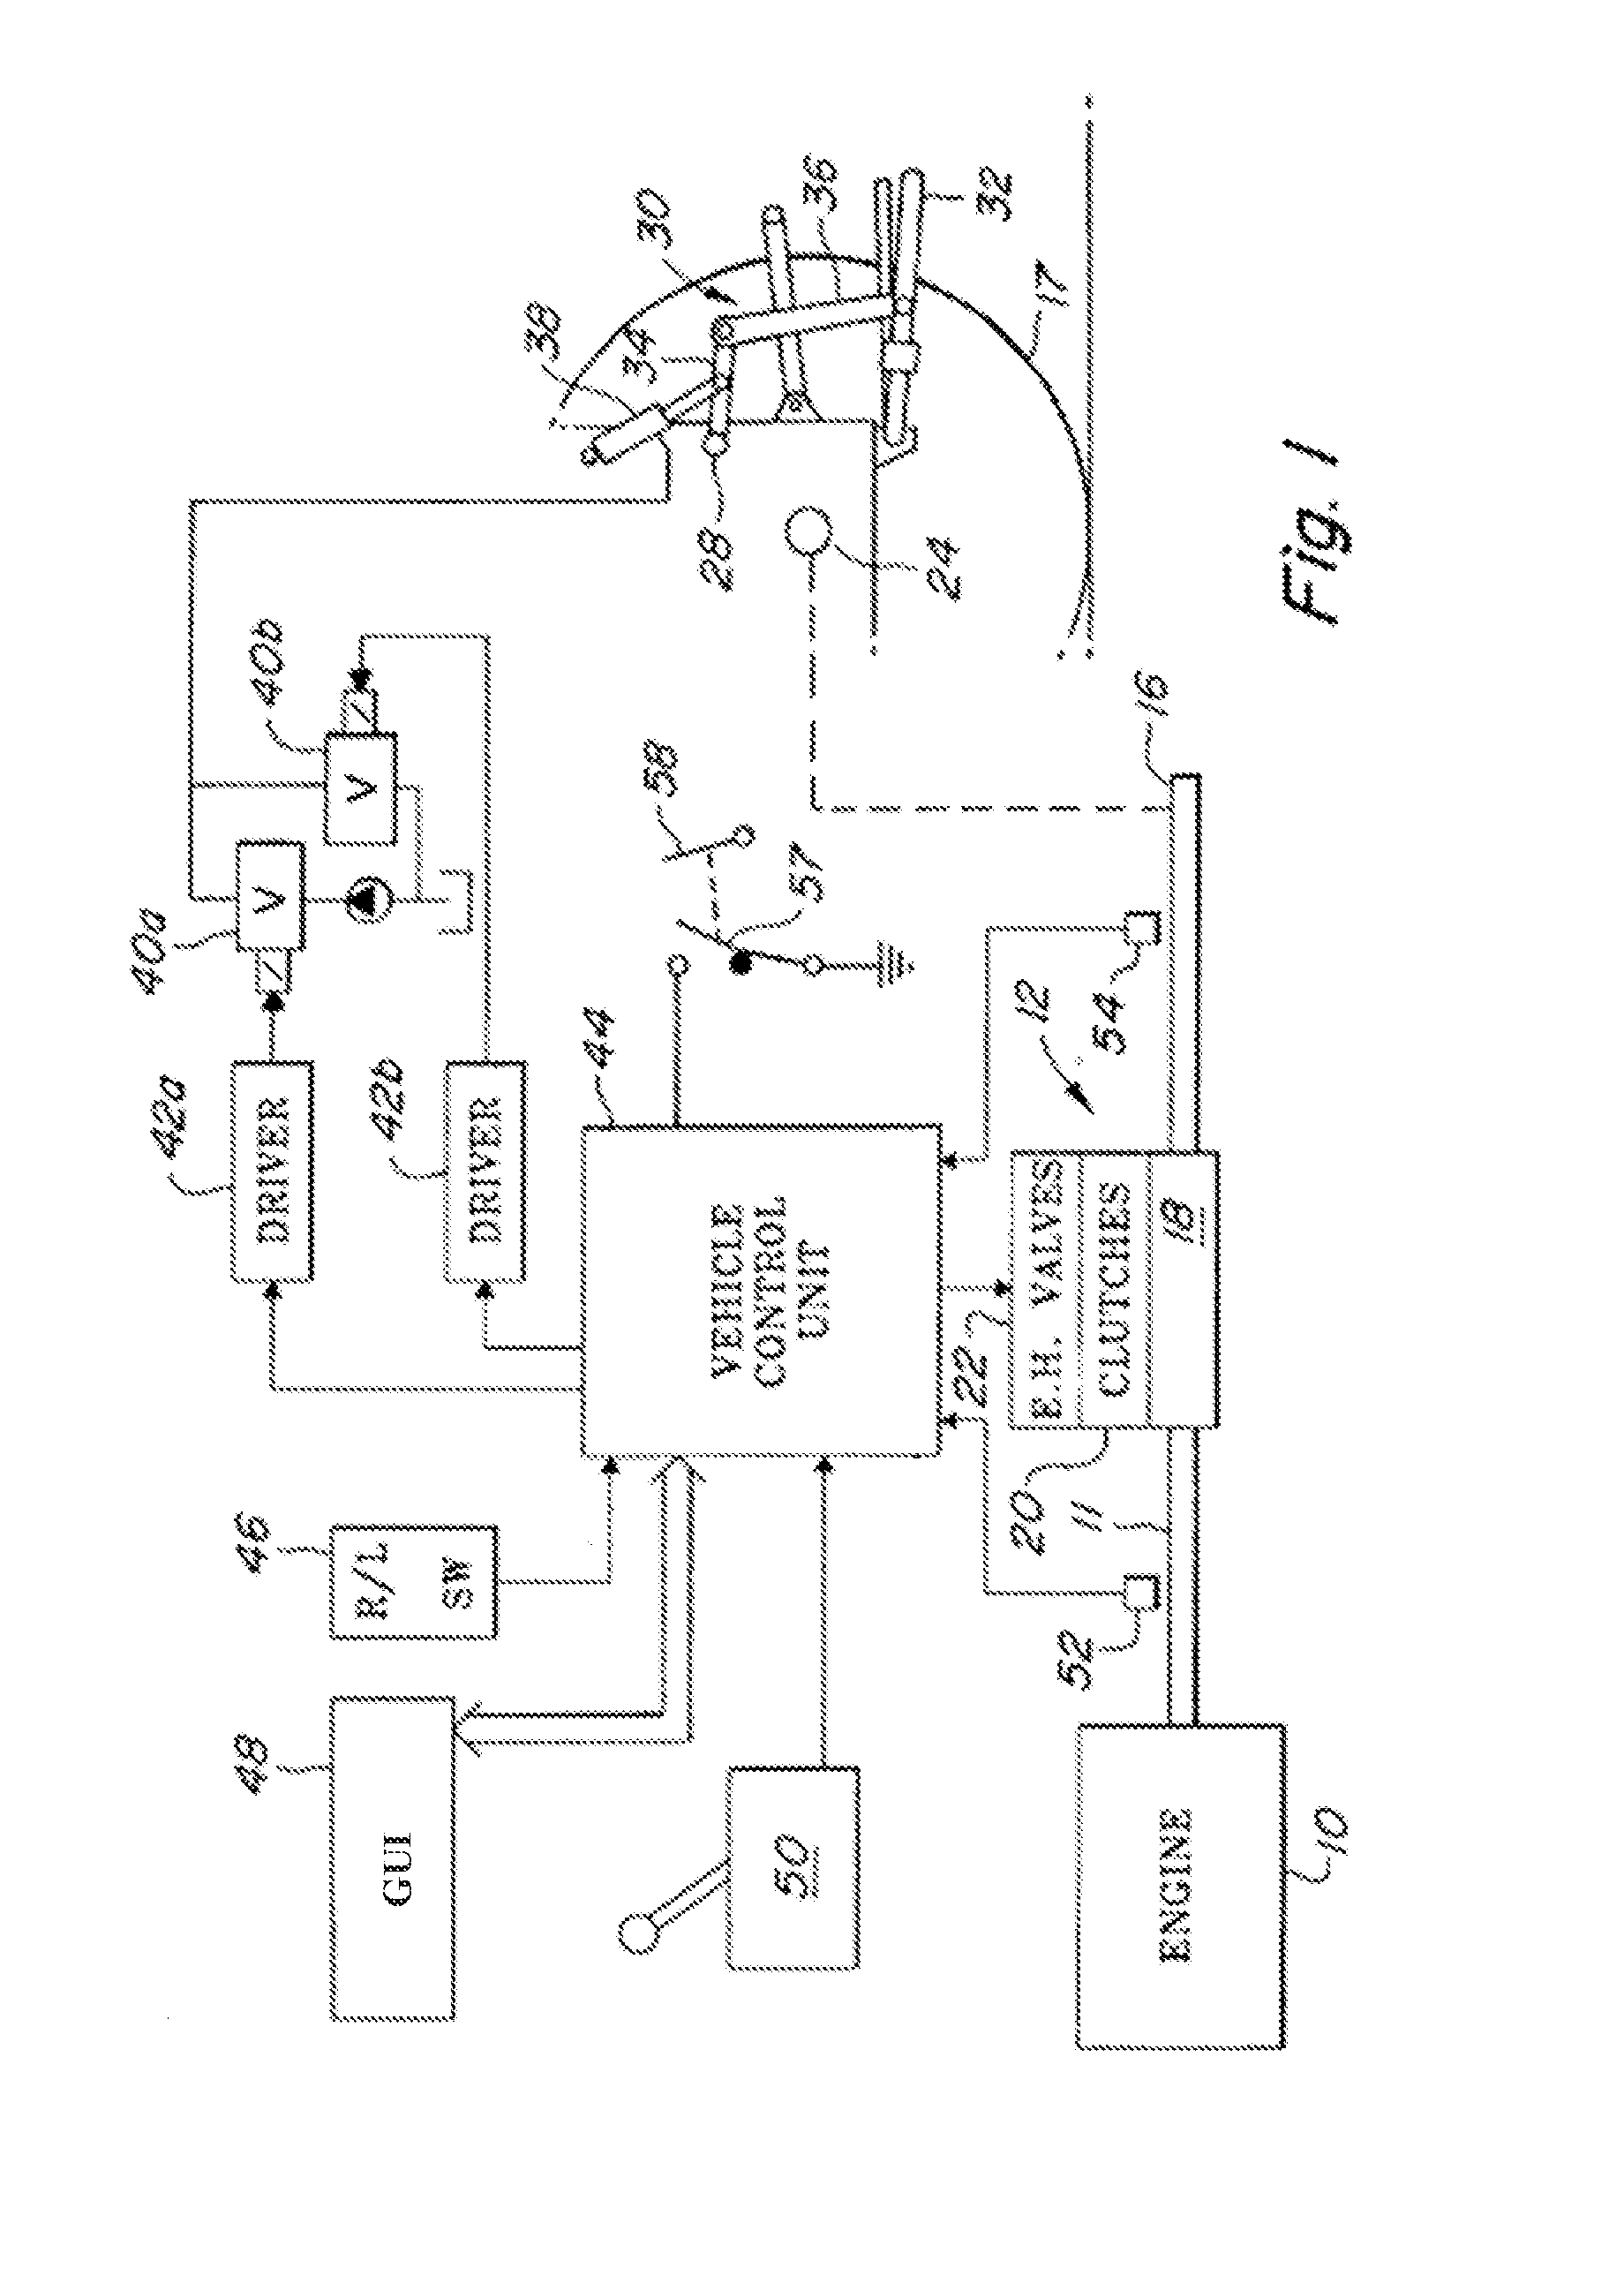 Vehicle operation management system with automatic sequence detection